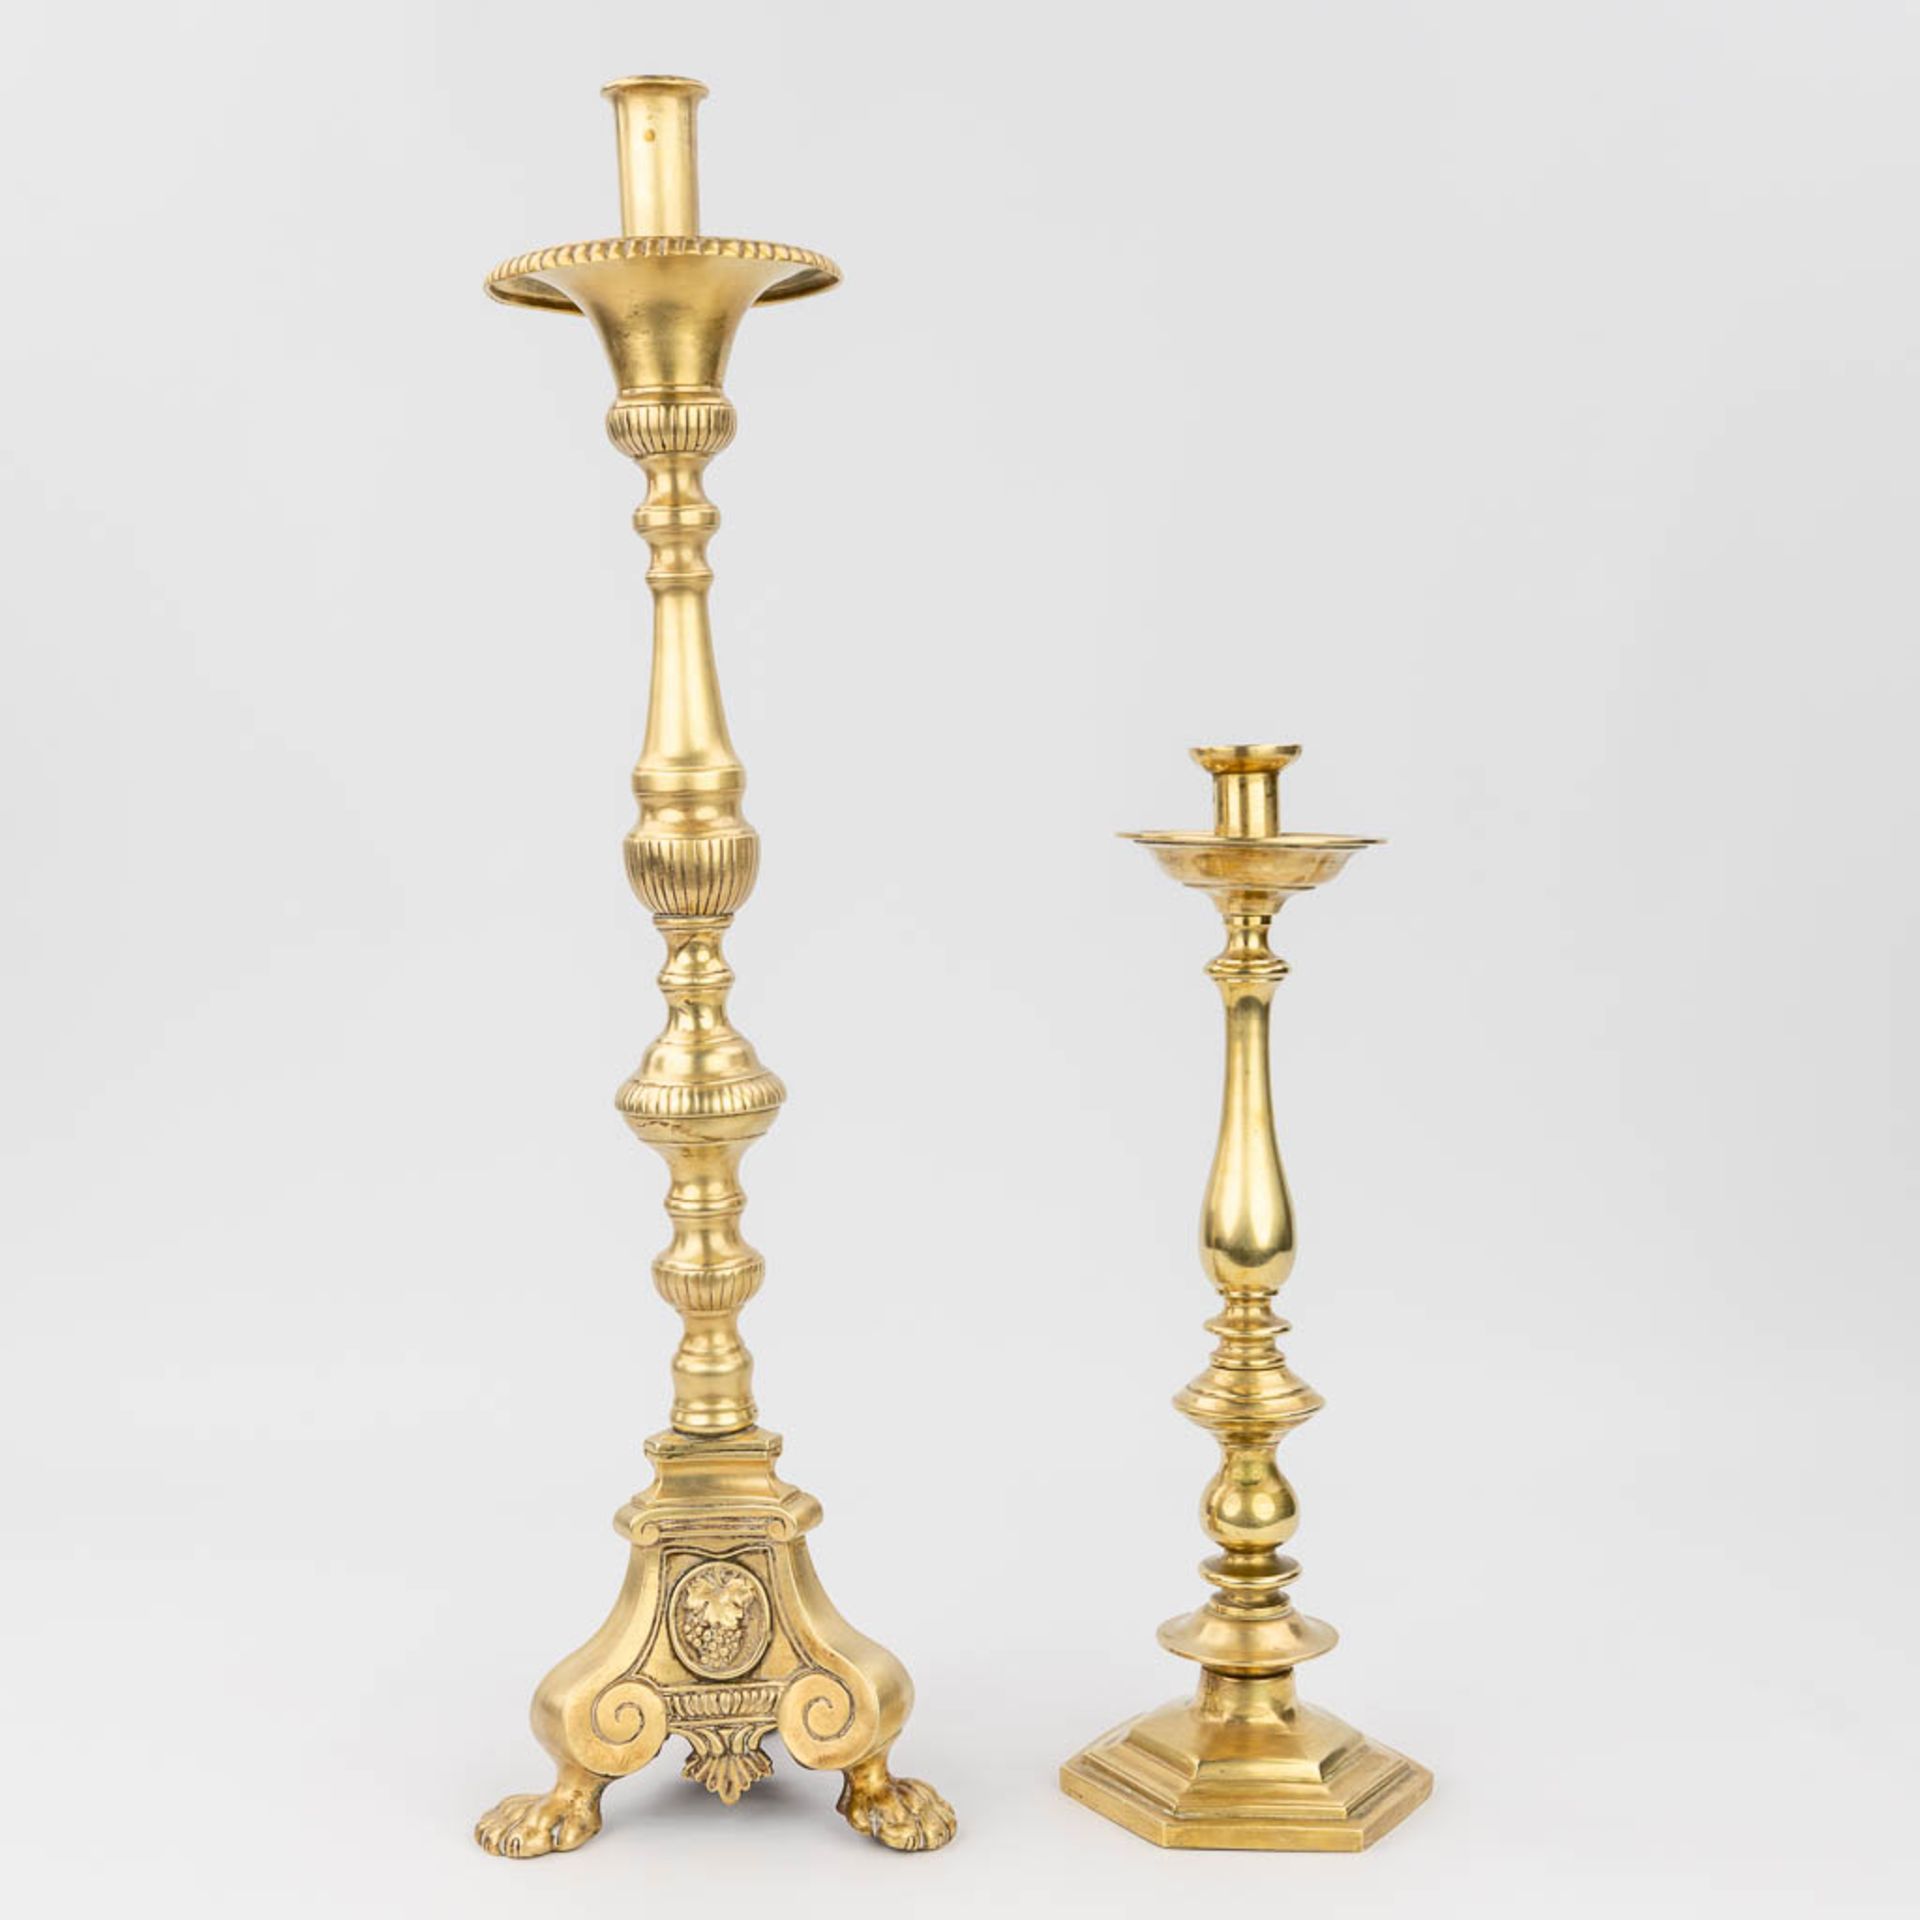 A collection of 2 candelabra made of polished bronze. (H:65 cm) - Image 5 of 14